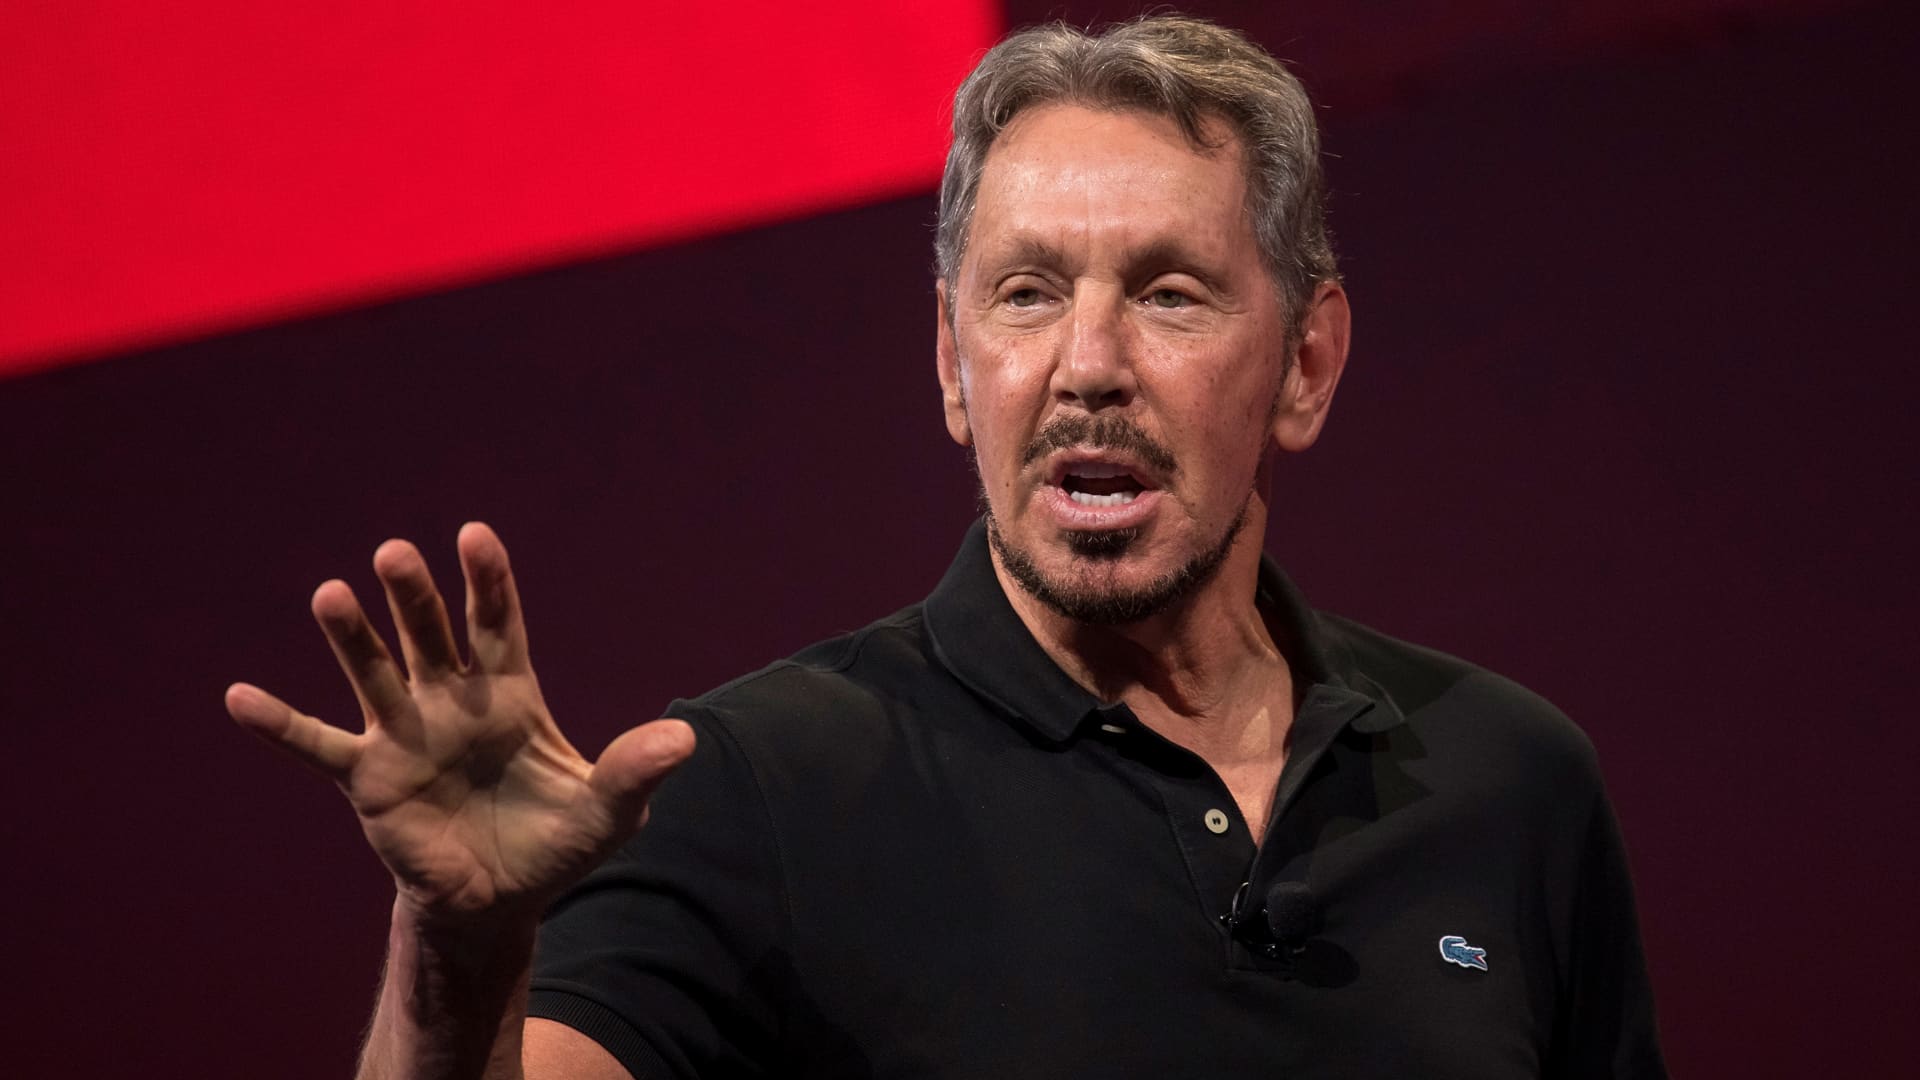 Larry Ellison, chairman and co-founder of Oracle Corp., speaks during the Oracle OpenWorld 2017 conference in San Francisco, California, U.S., on Sunday, Oct. 1, 2017. 